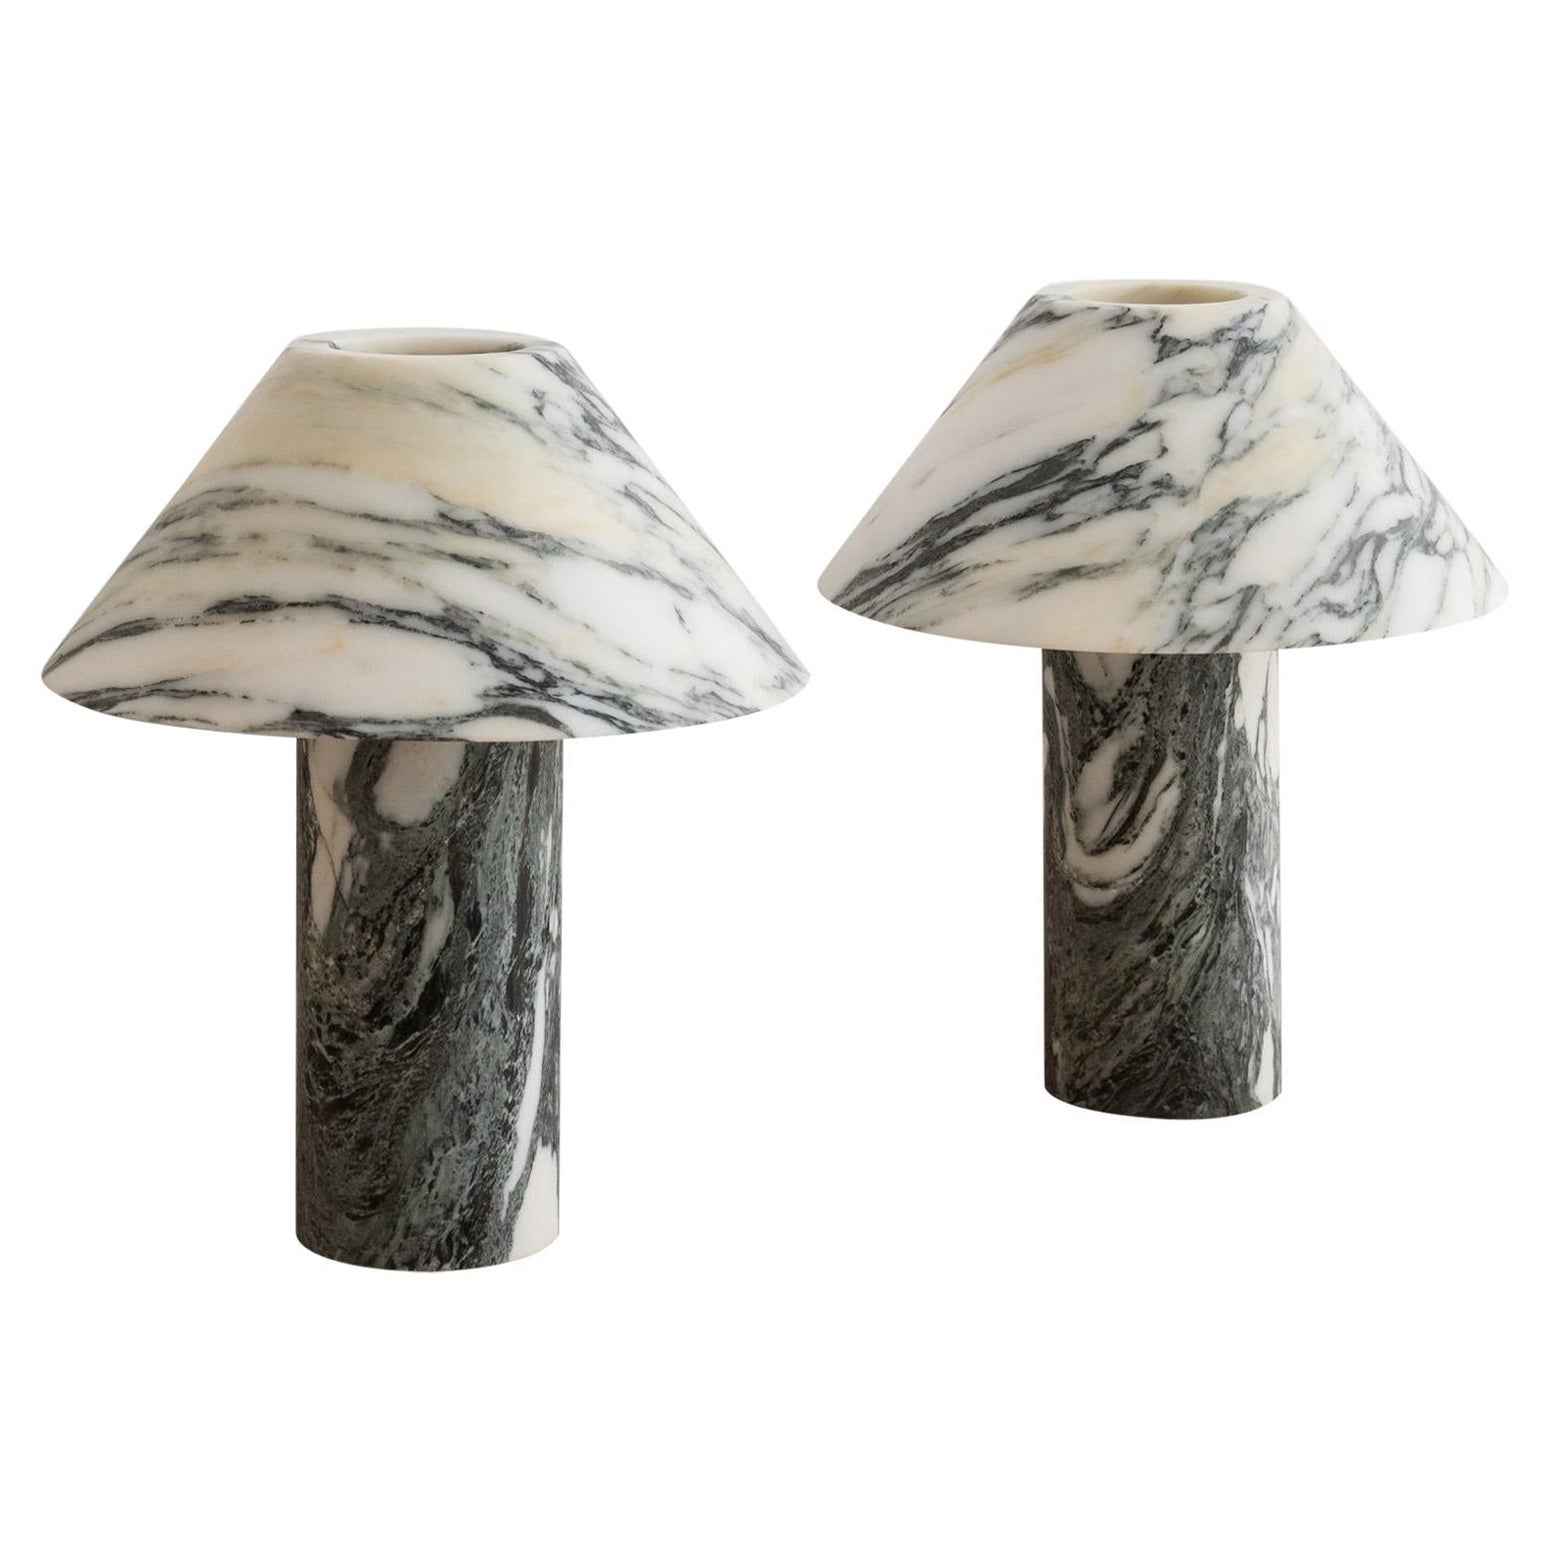 Set of 2 Large Arabescato Pillar Lamps by Henry Wilson